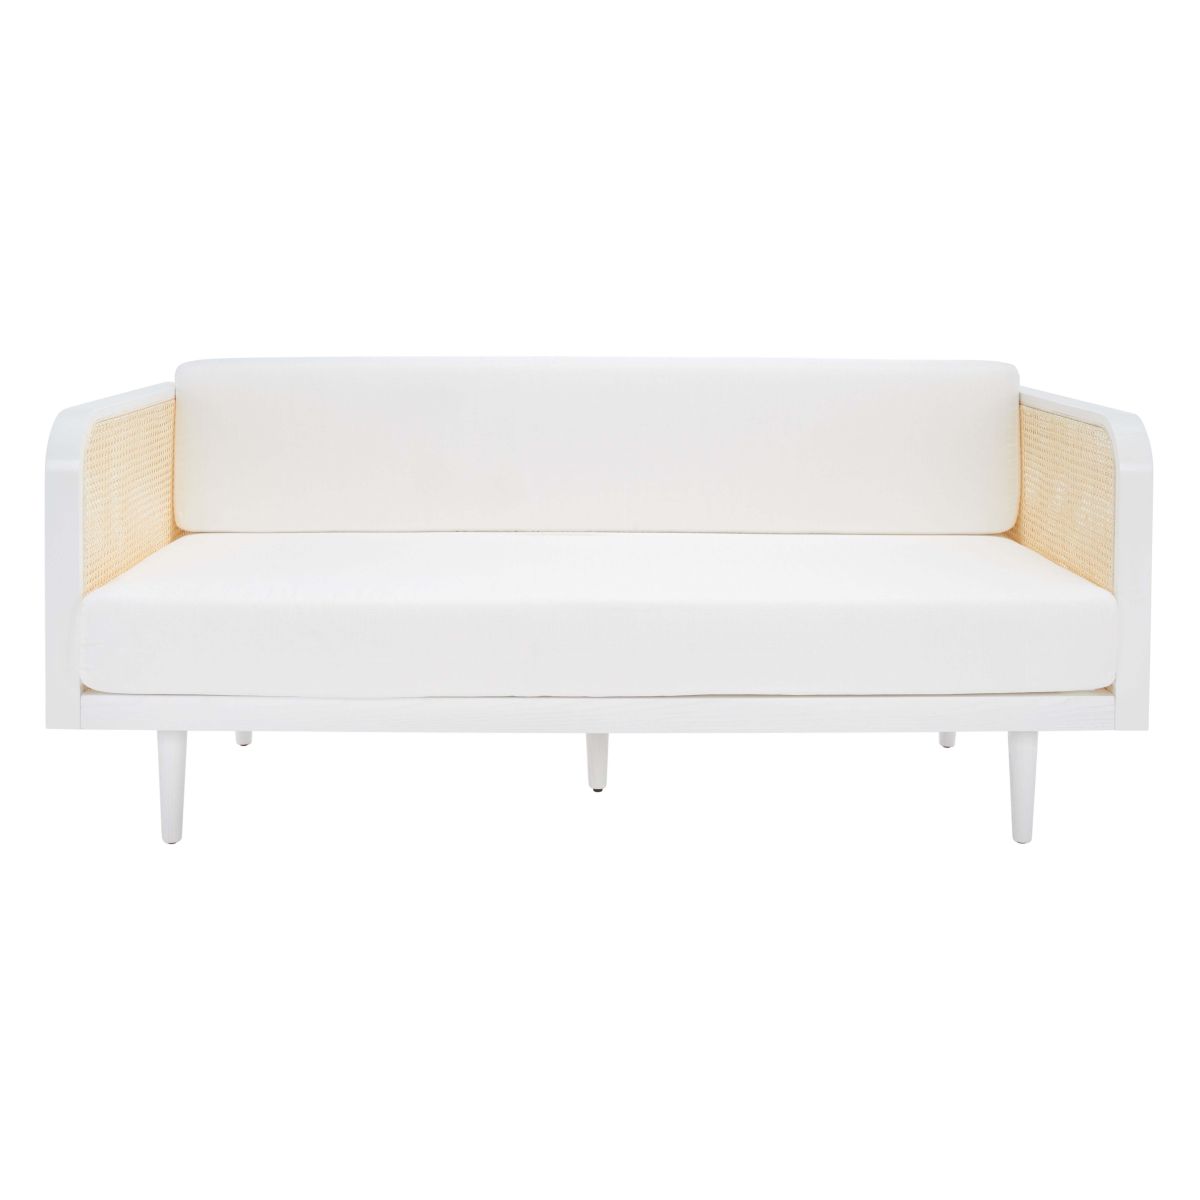 Safavieh Couture Helena French Cane Daybed